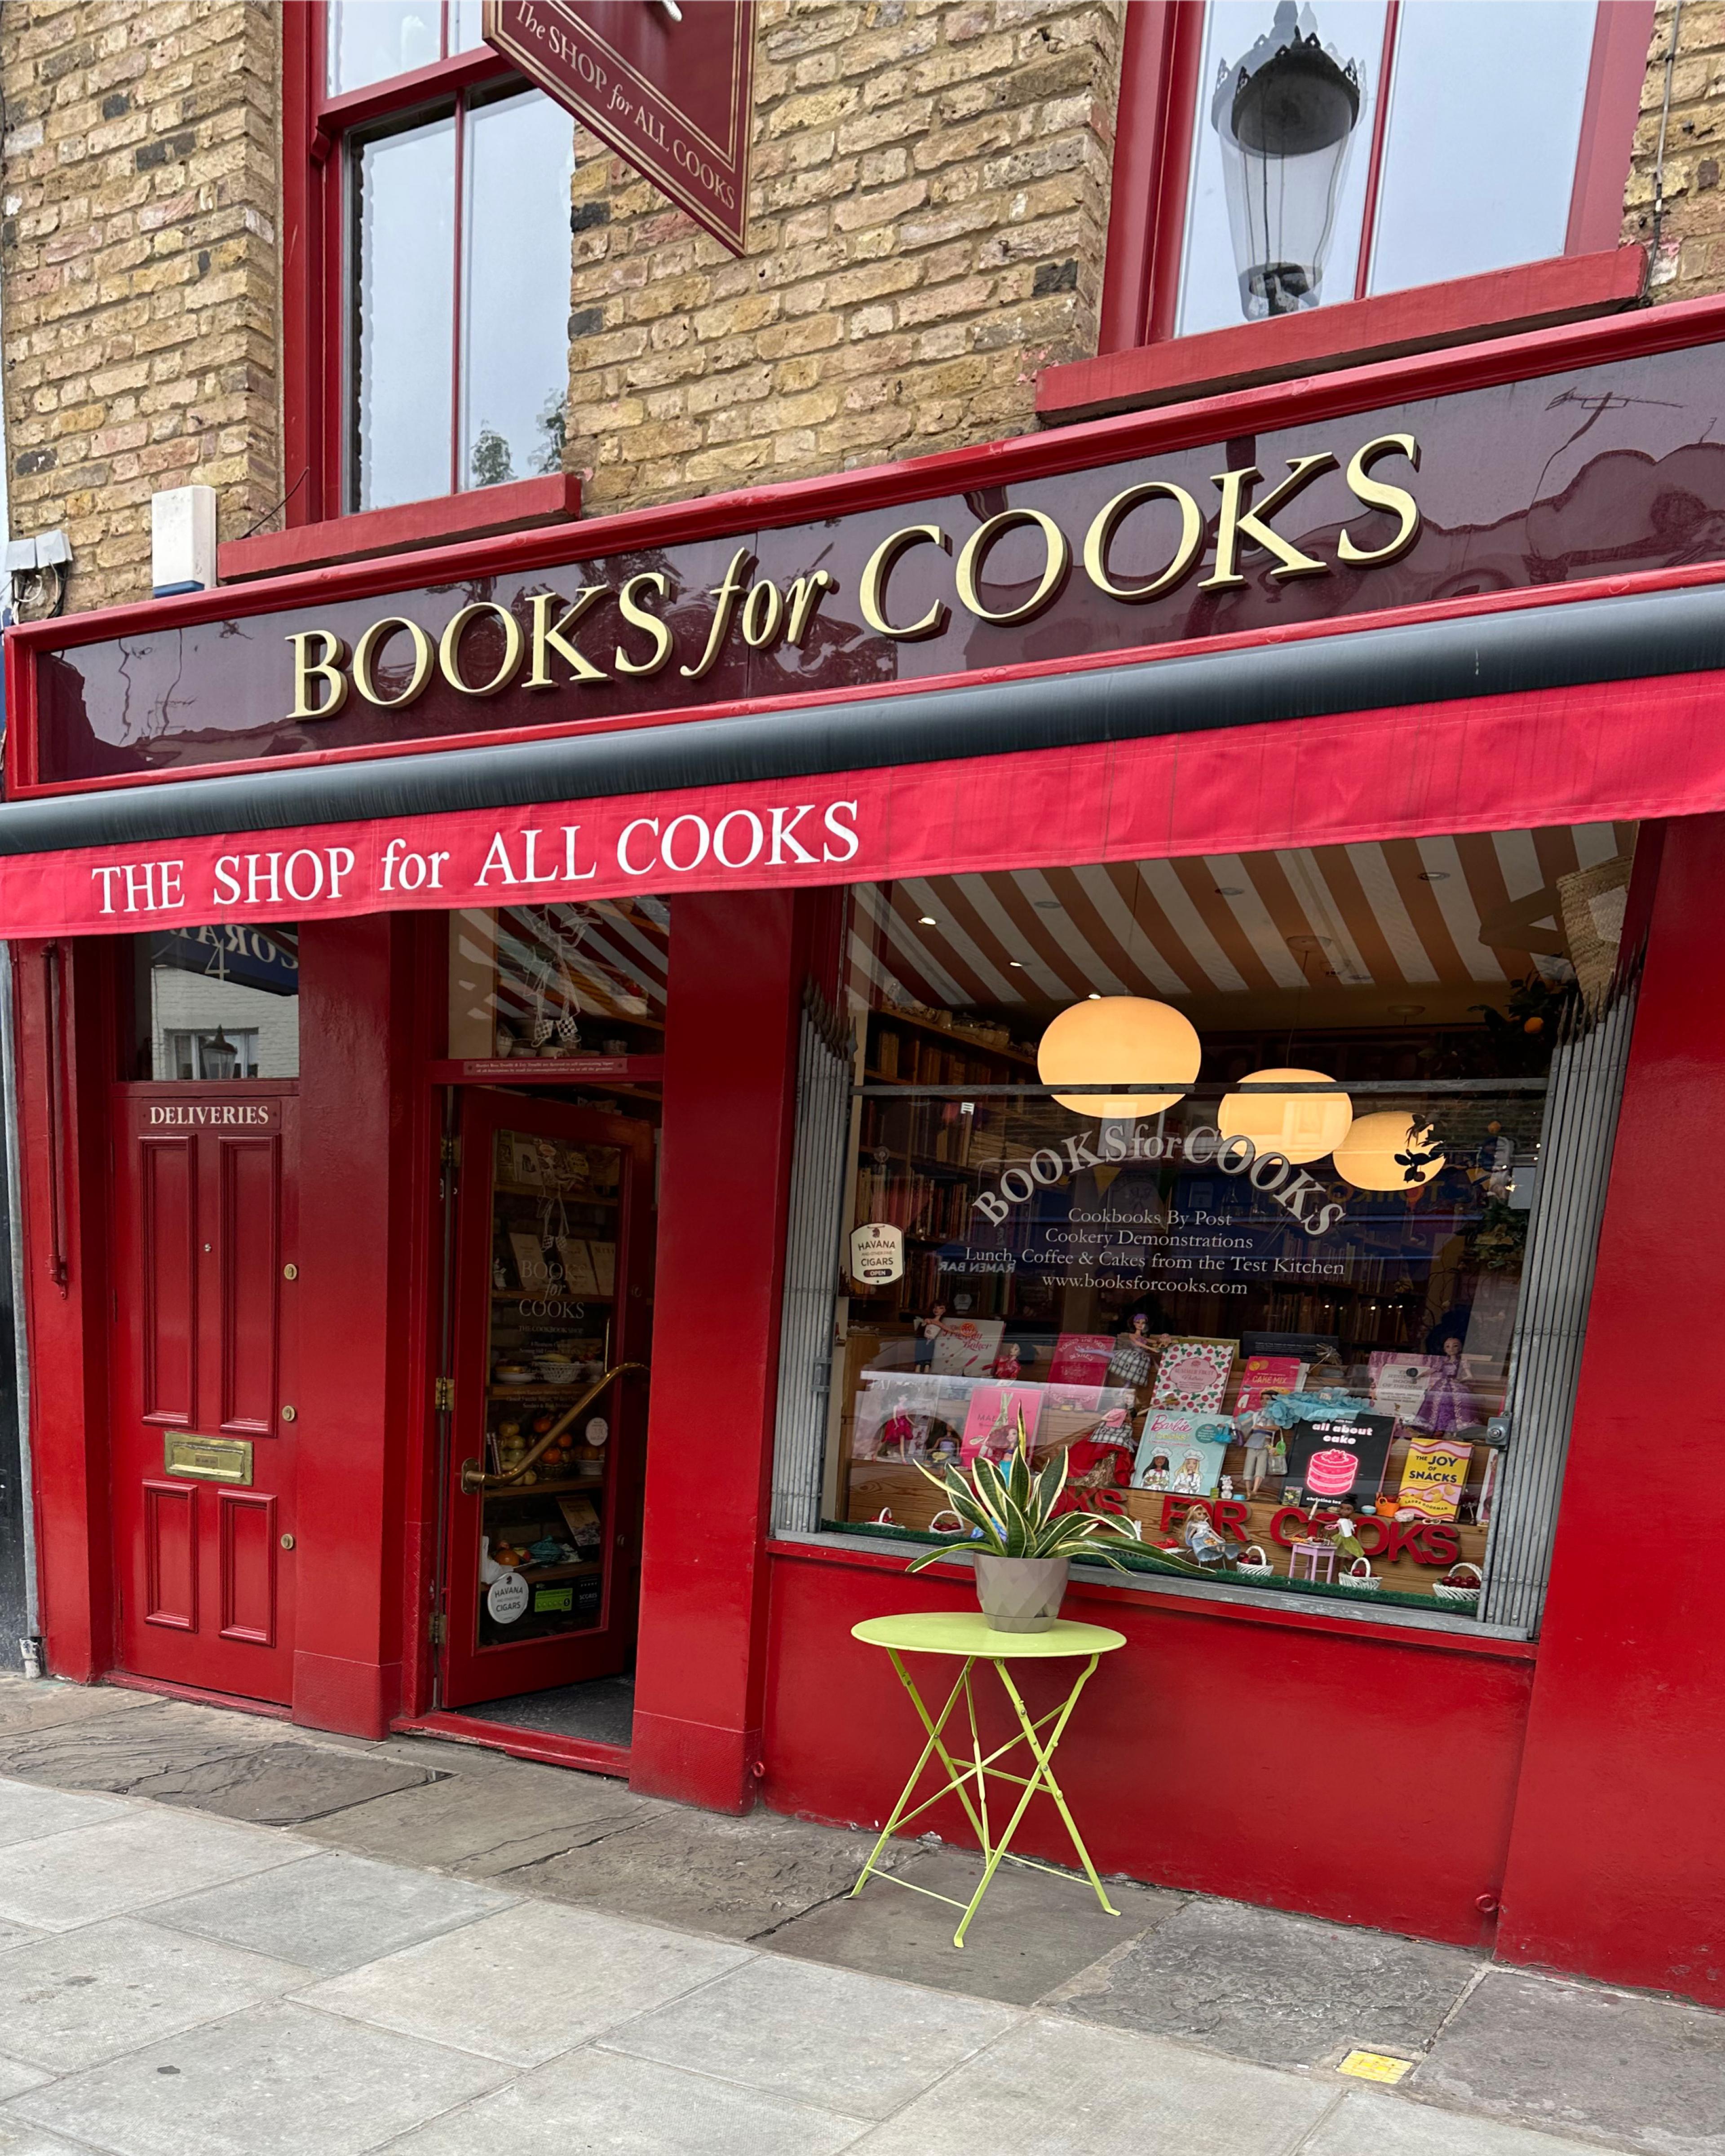 exterior of storefront in London with brick building and red sign saying Books for Cooks